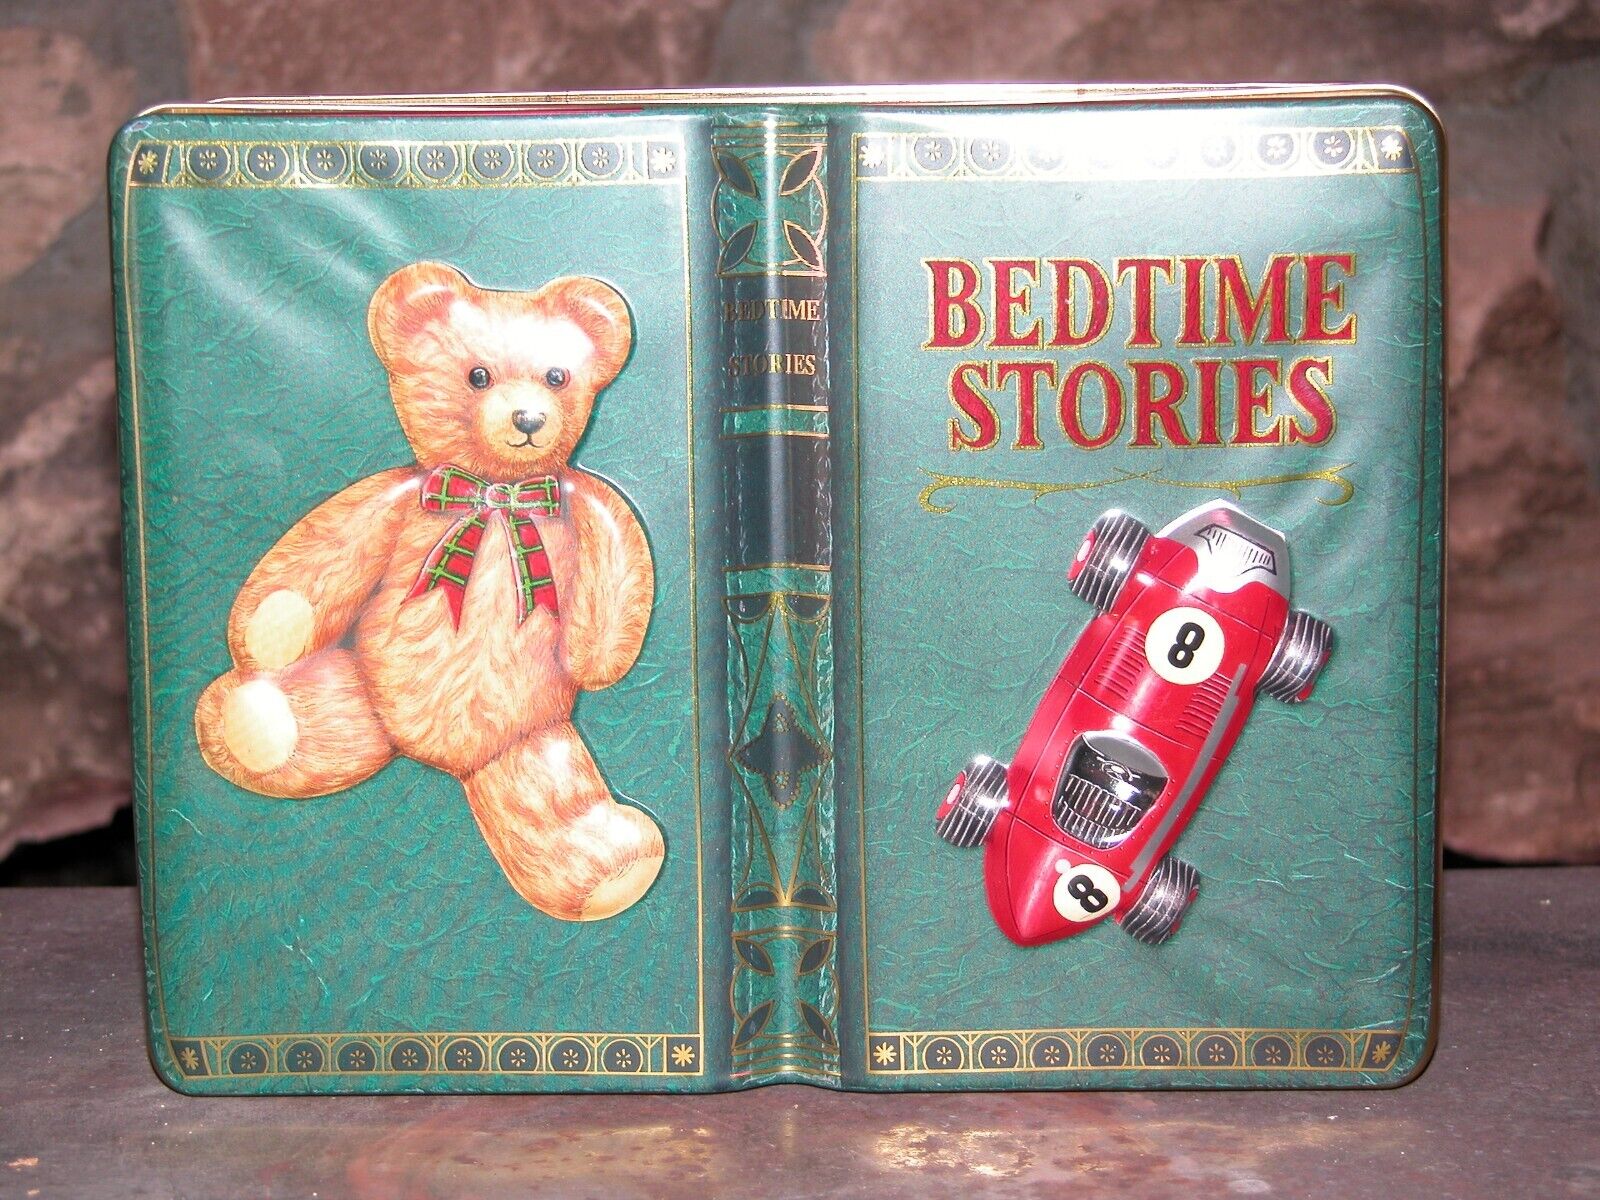 The Silver Crane Company Made This Tin With Bedtime Stories